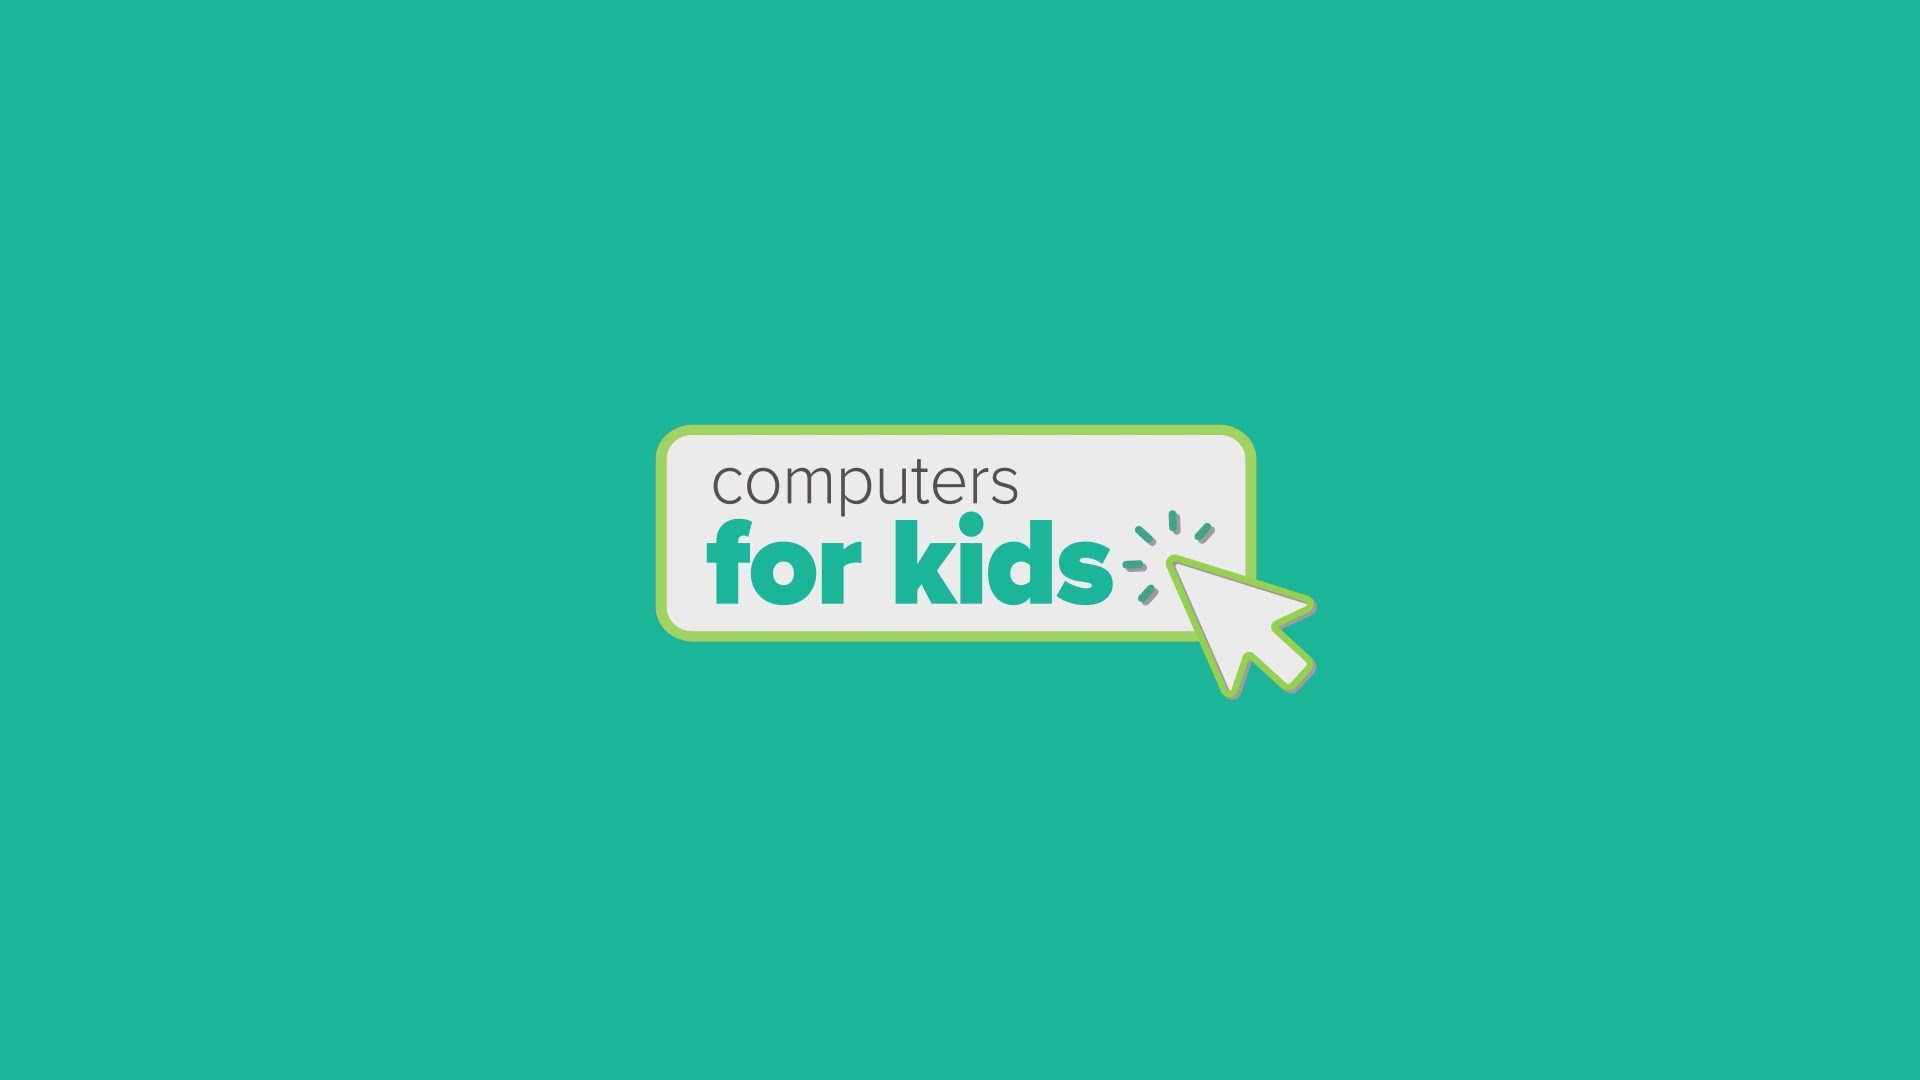 The Computers for Kids drive is spearheaded by WKYC Studios, PCs for People and Cuyahoga County Public Library. Sponsored by CrossCountry Mortgage